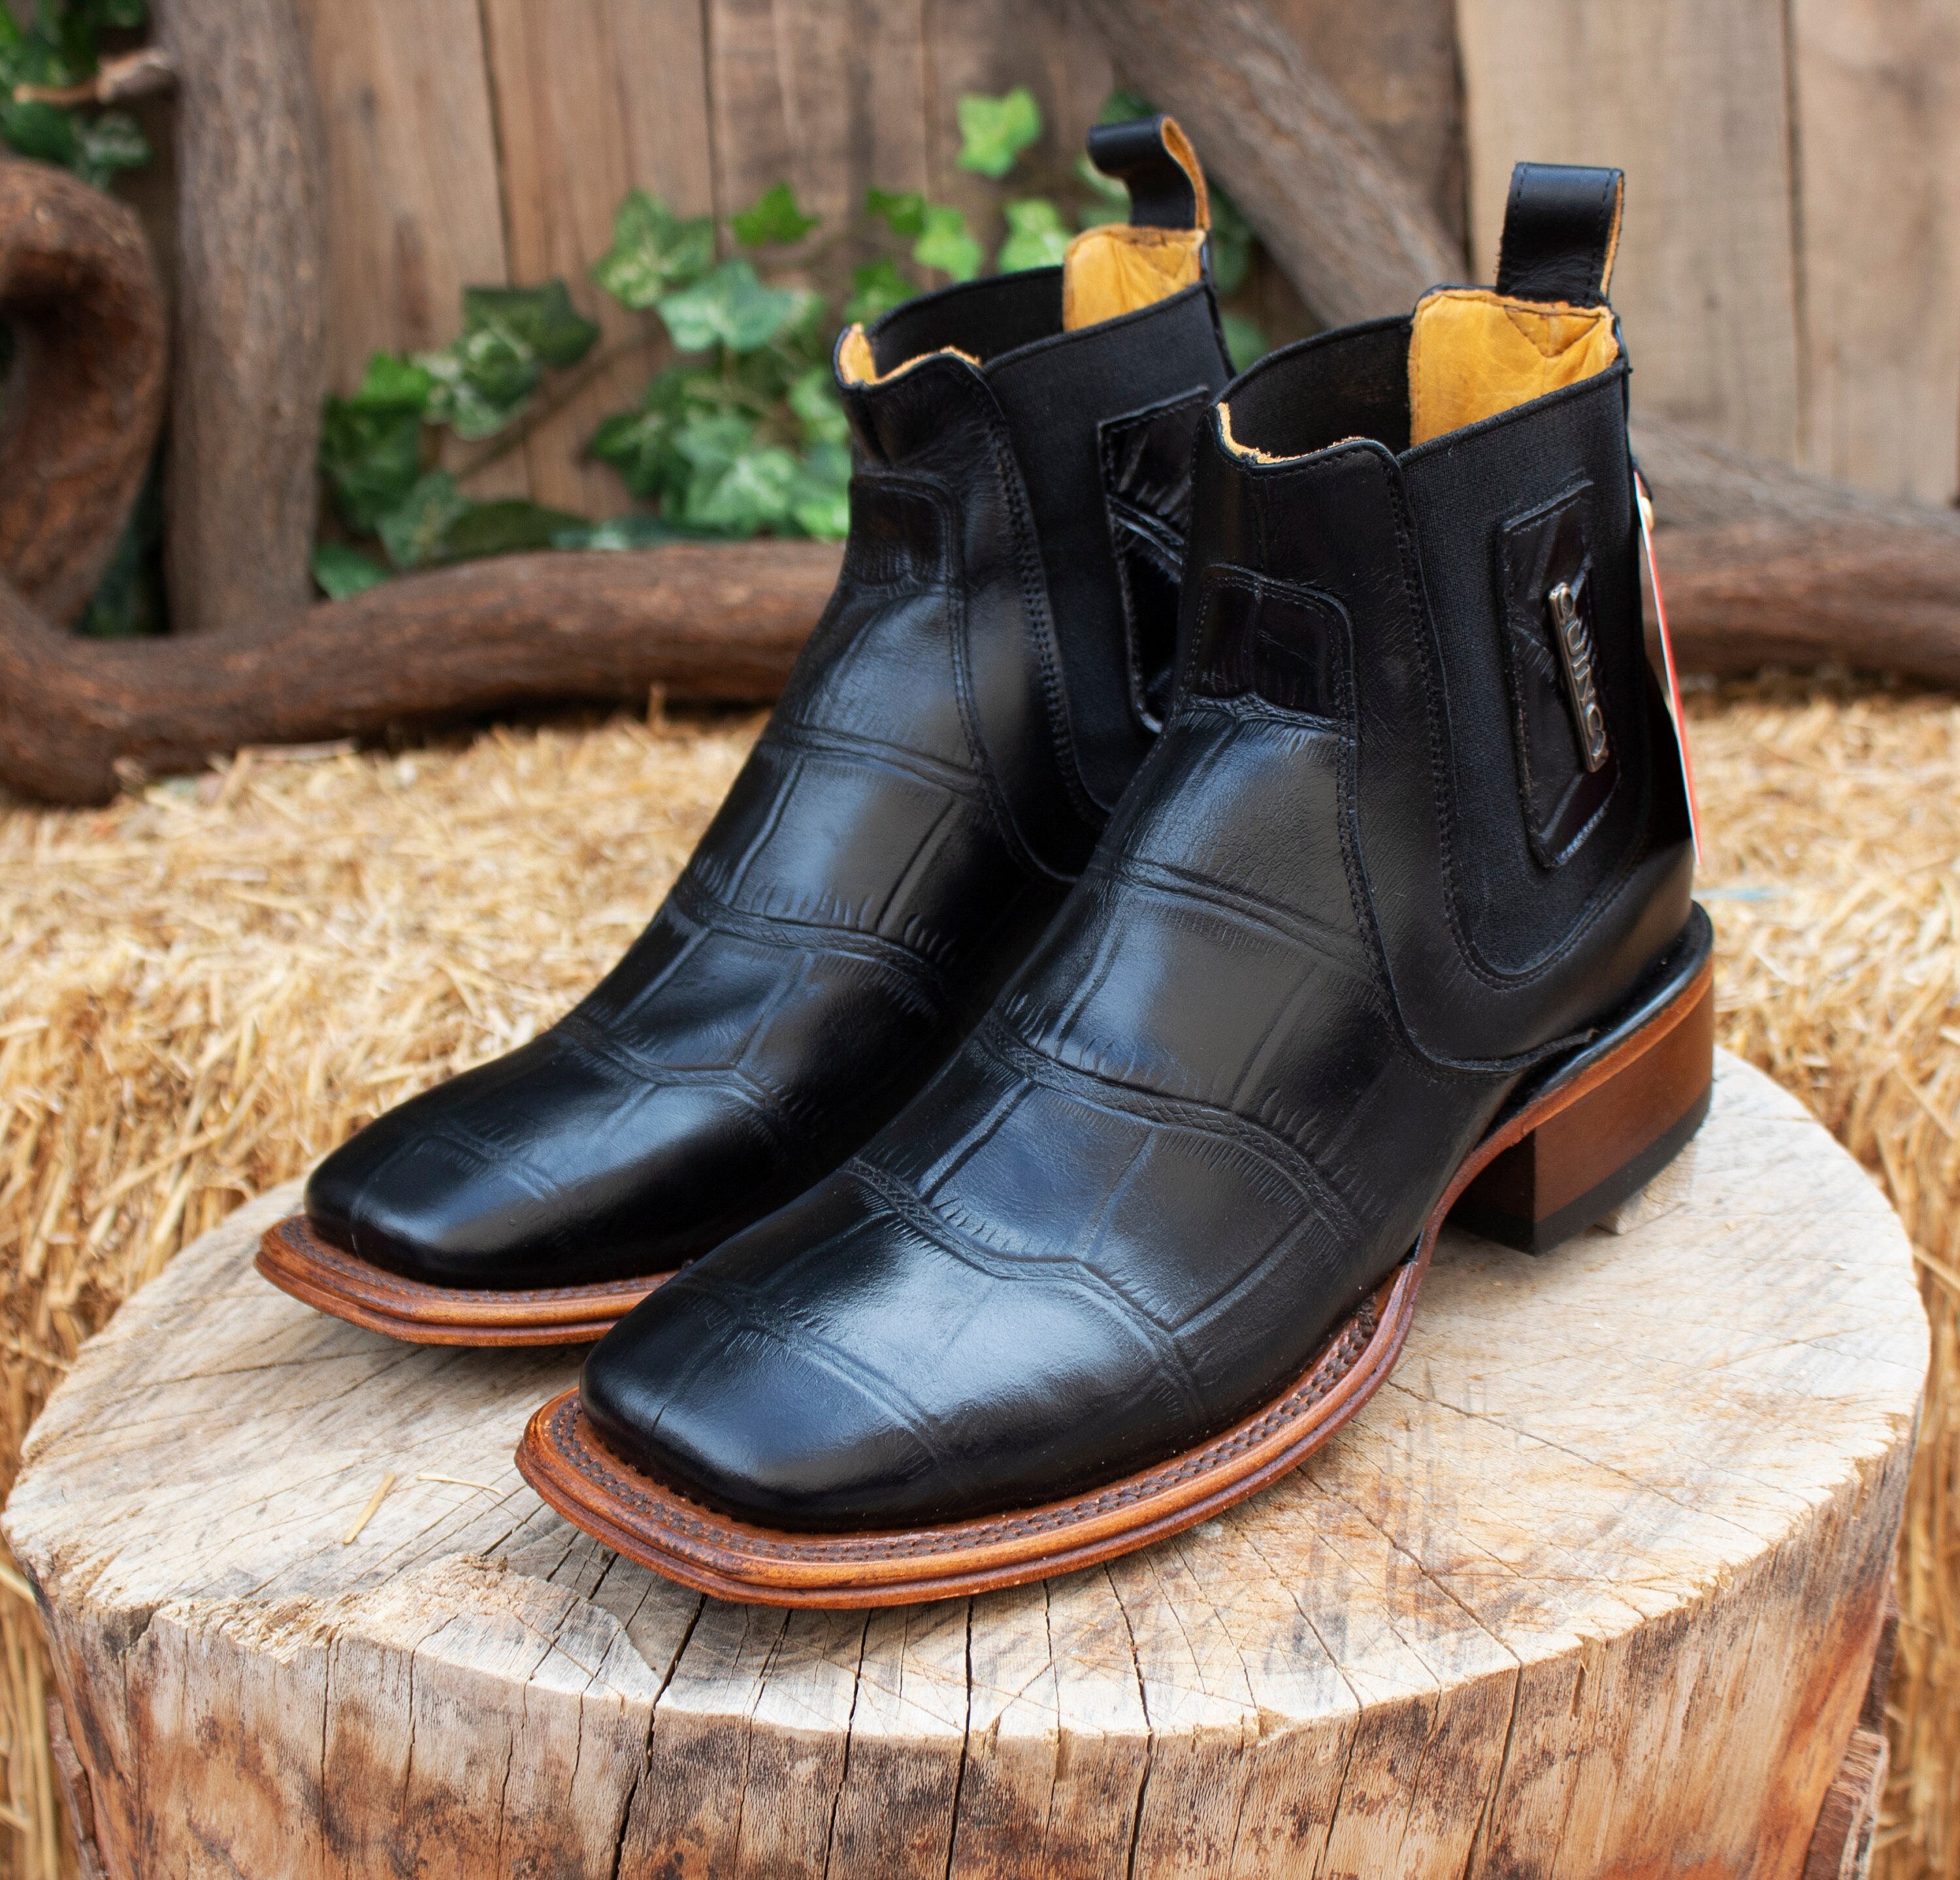 10 Unique Wedding Boot Ideas for Grooms